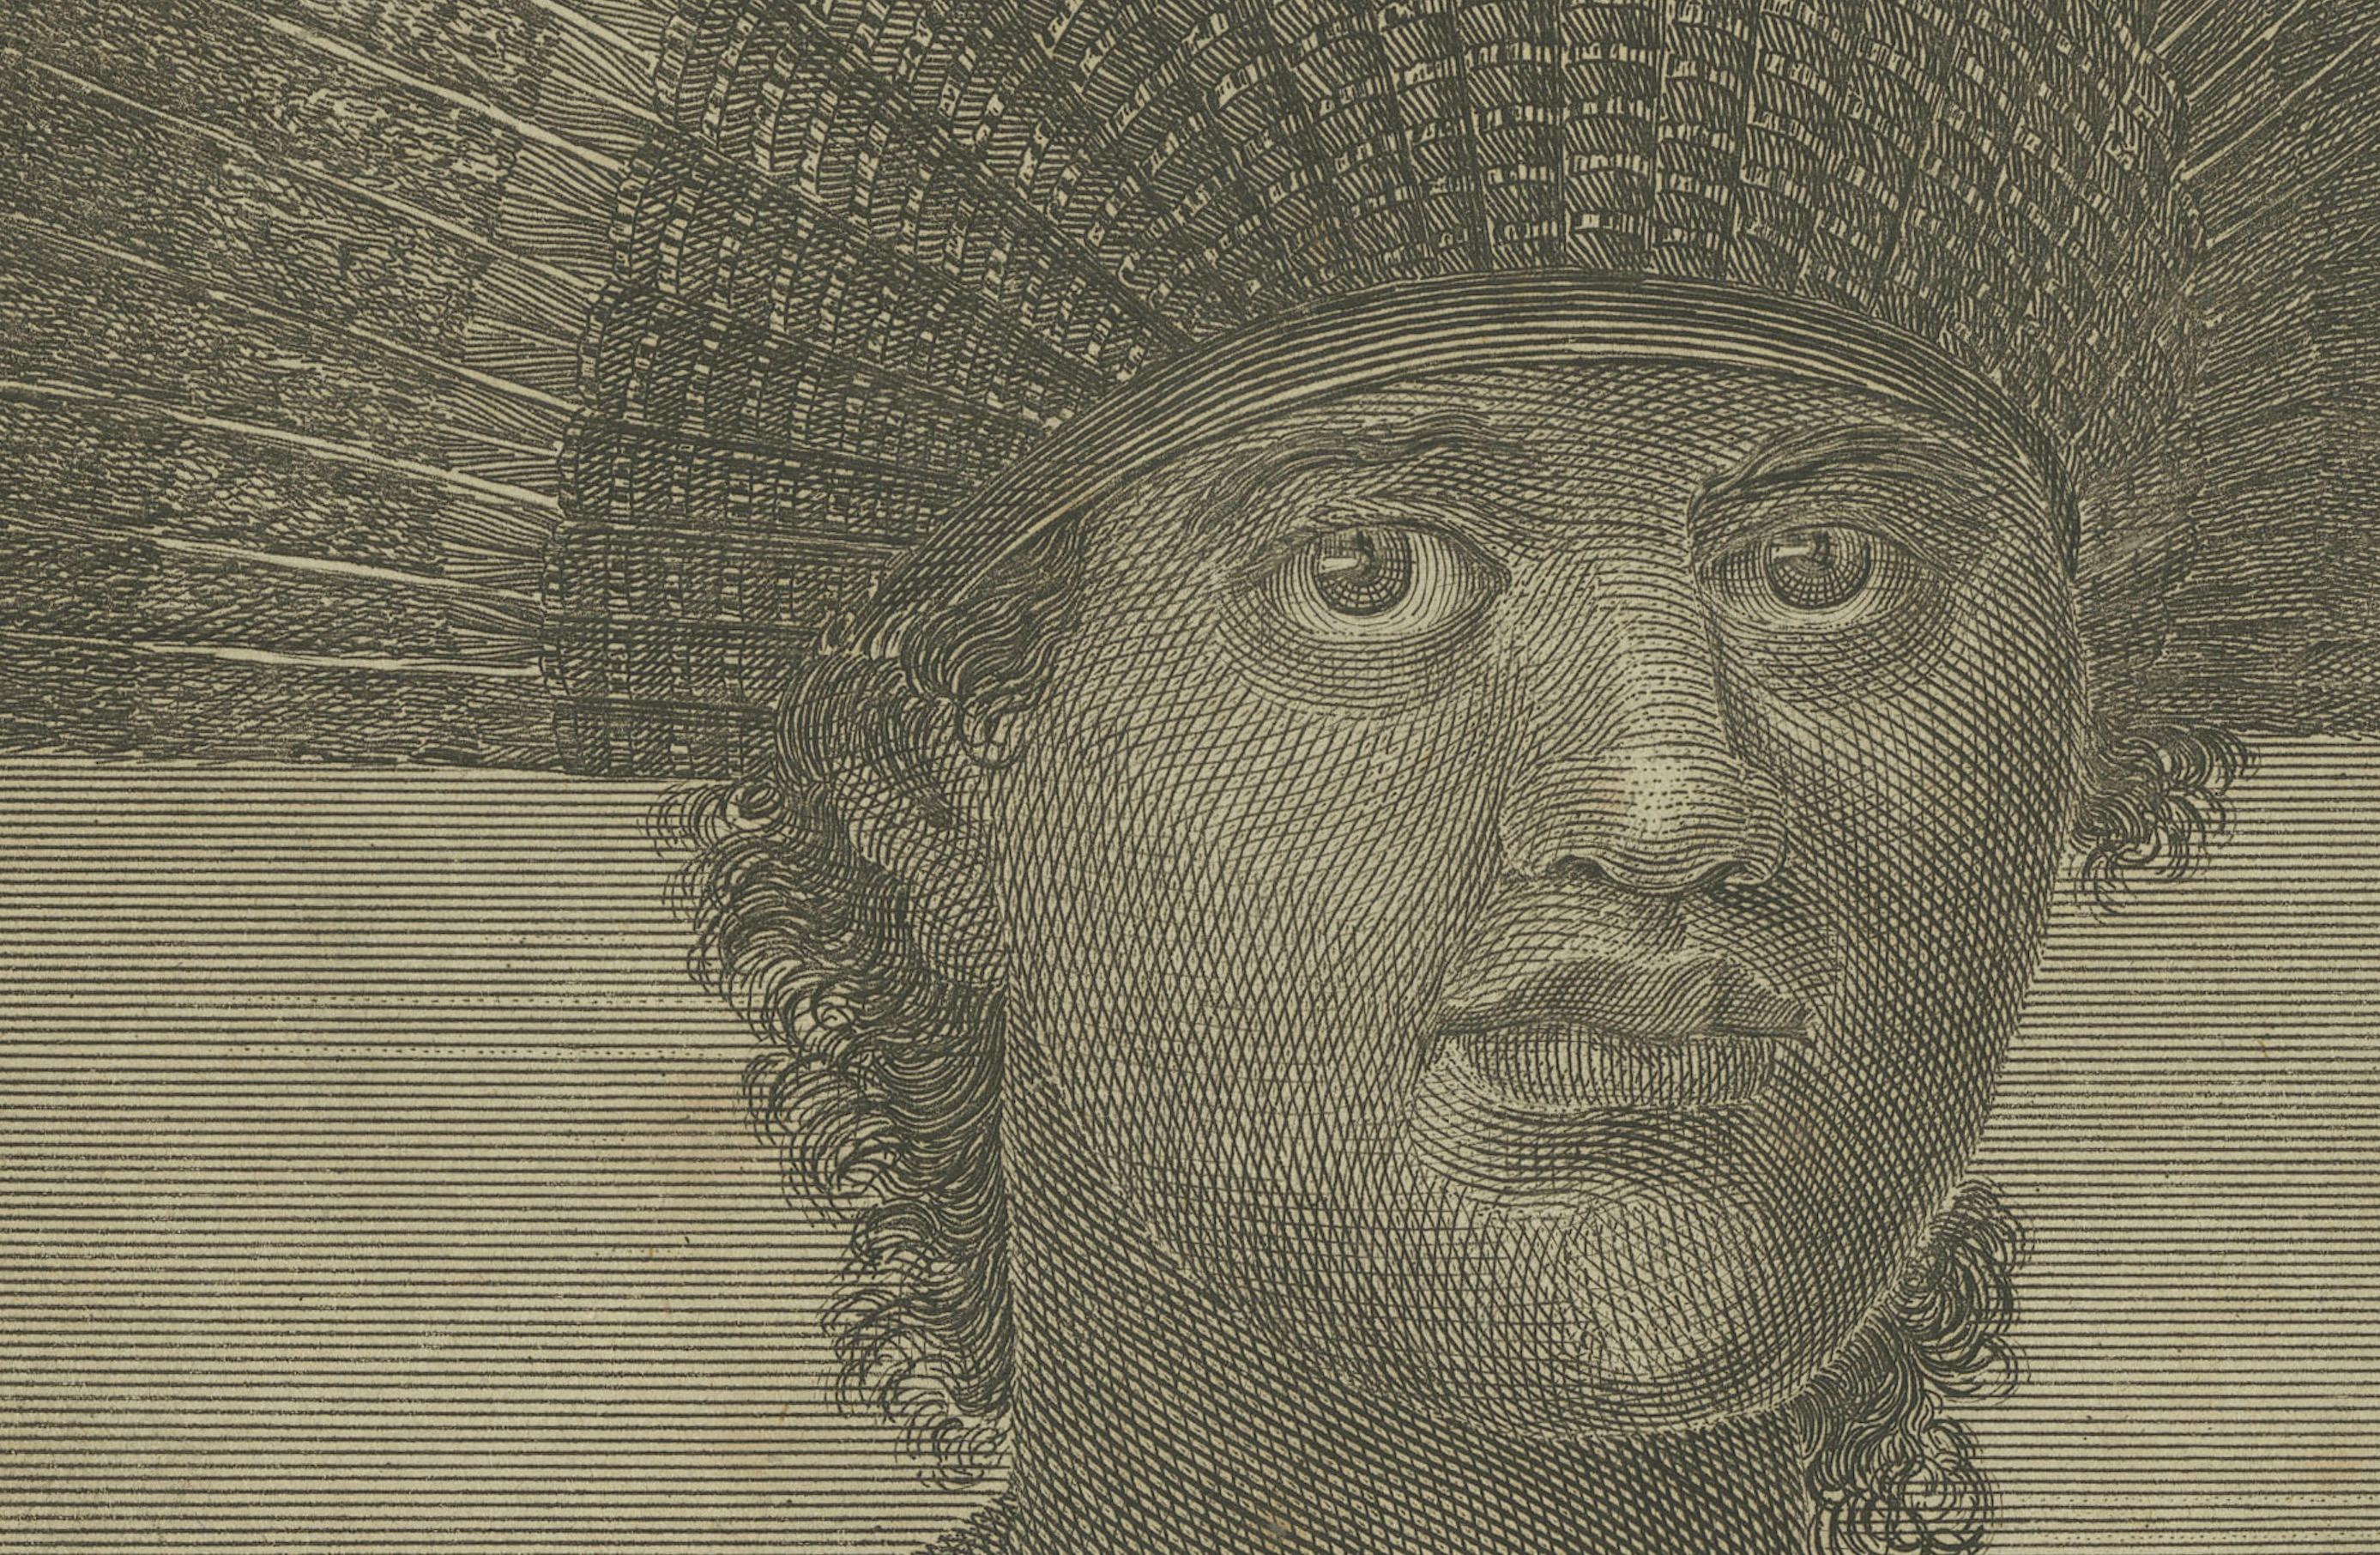 Engraved Regal Dignity and Island Beauty: King Poulaho of Tonga and a Woman of Eua, 1785 For Sale